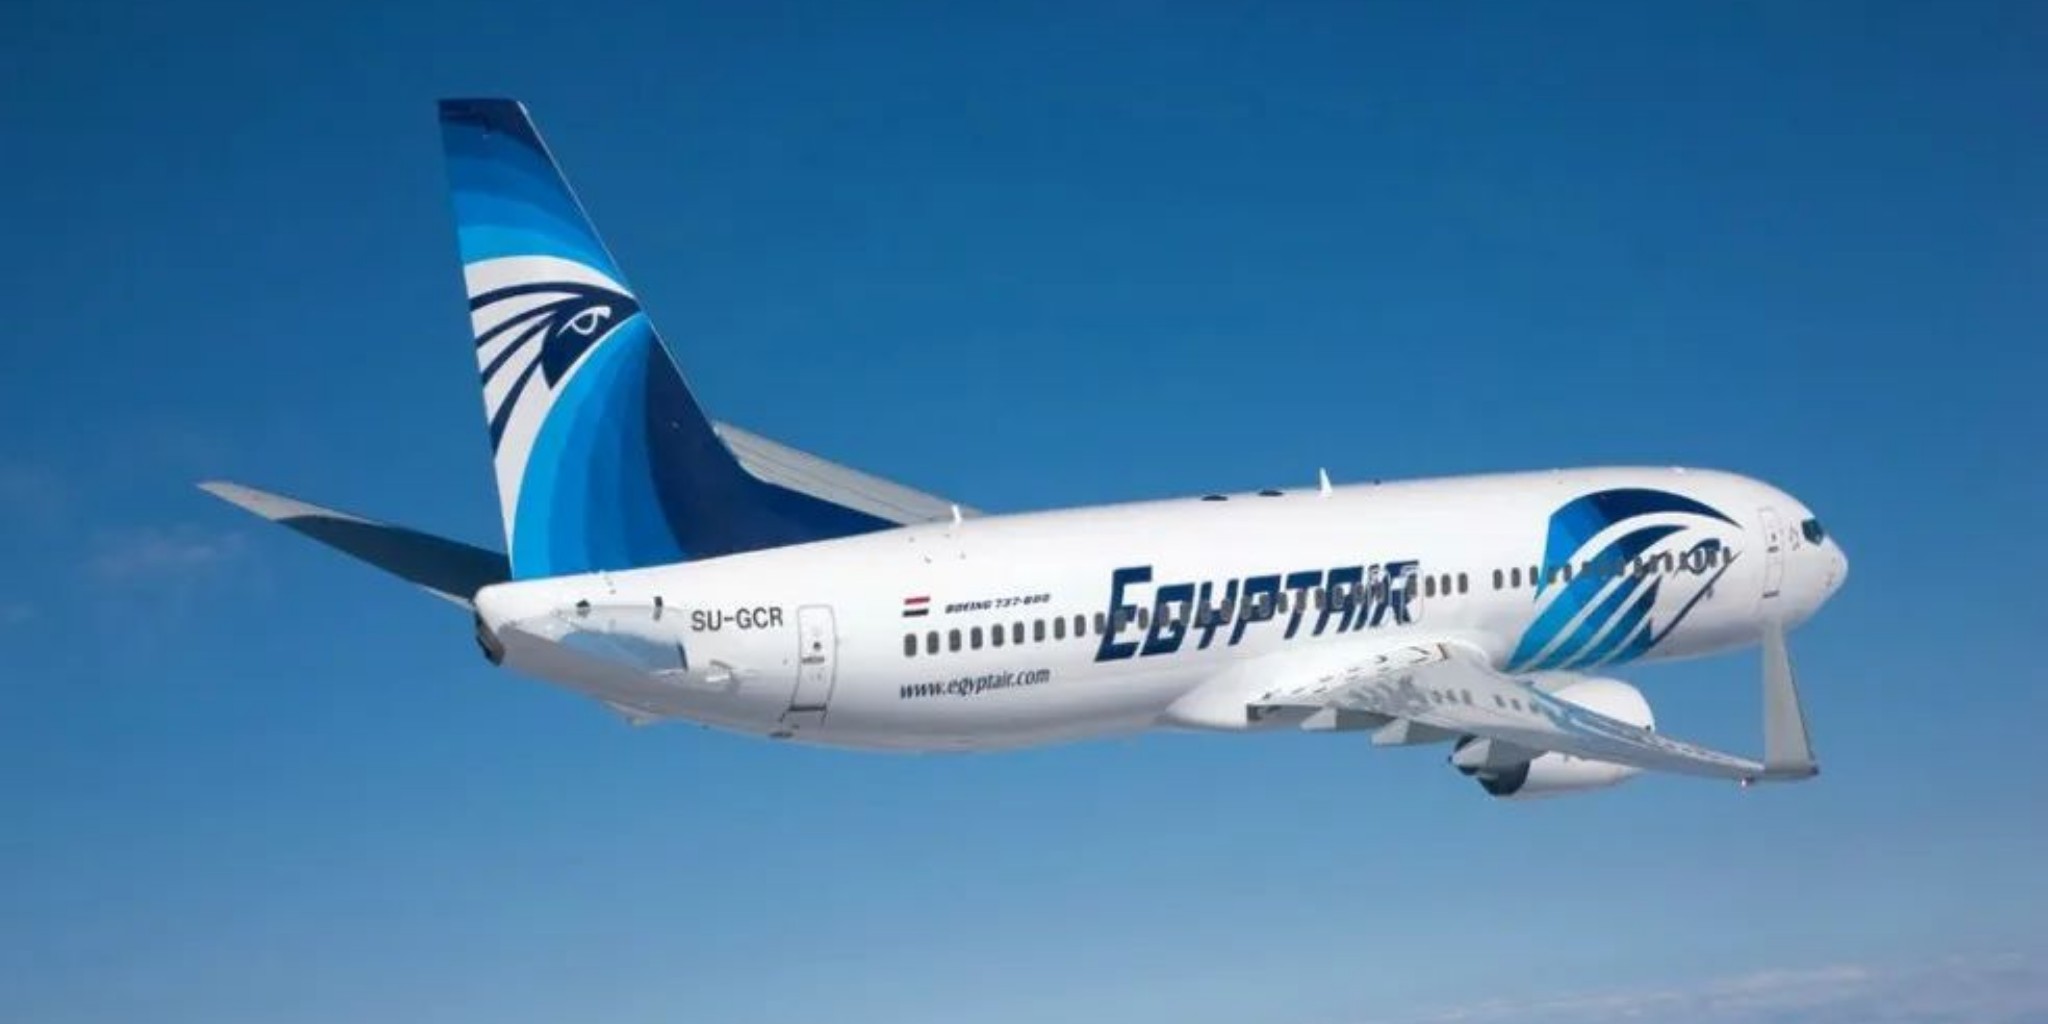 Egypt Air to Resume Operations in Sierra Leone